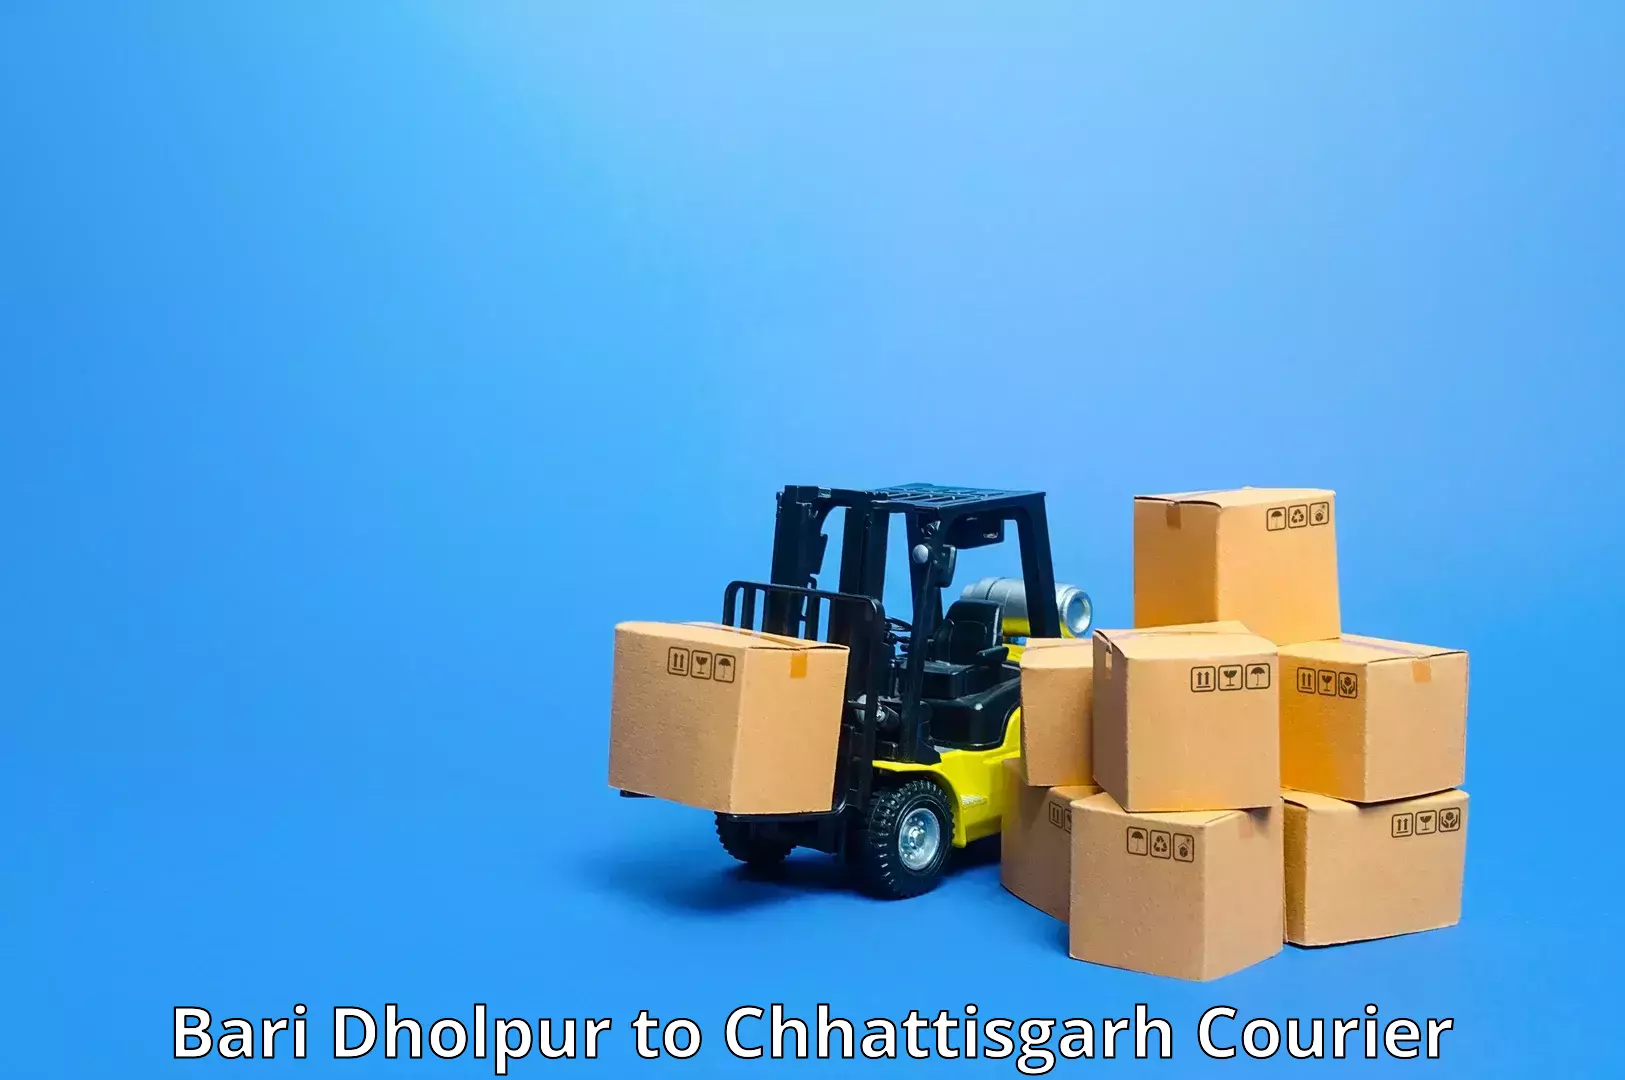 Urgent courier needs Bari Dholpur to bagbahra